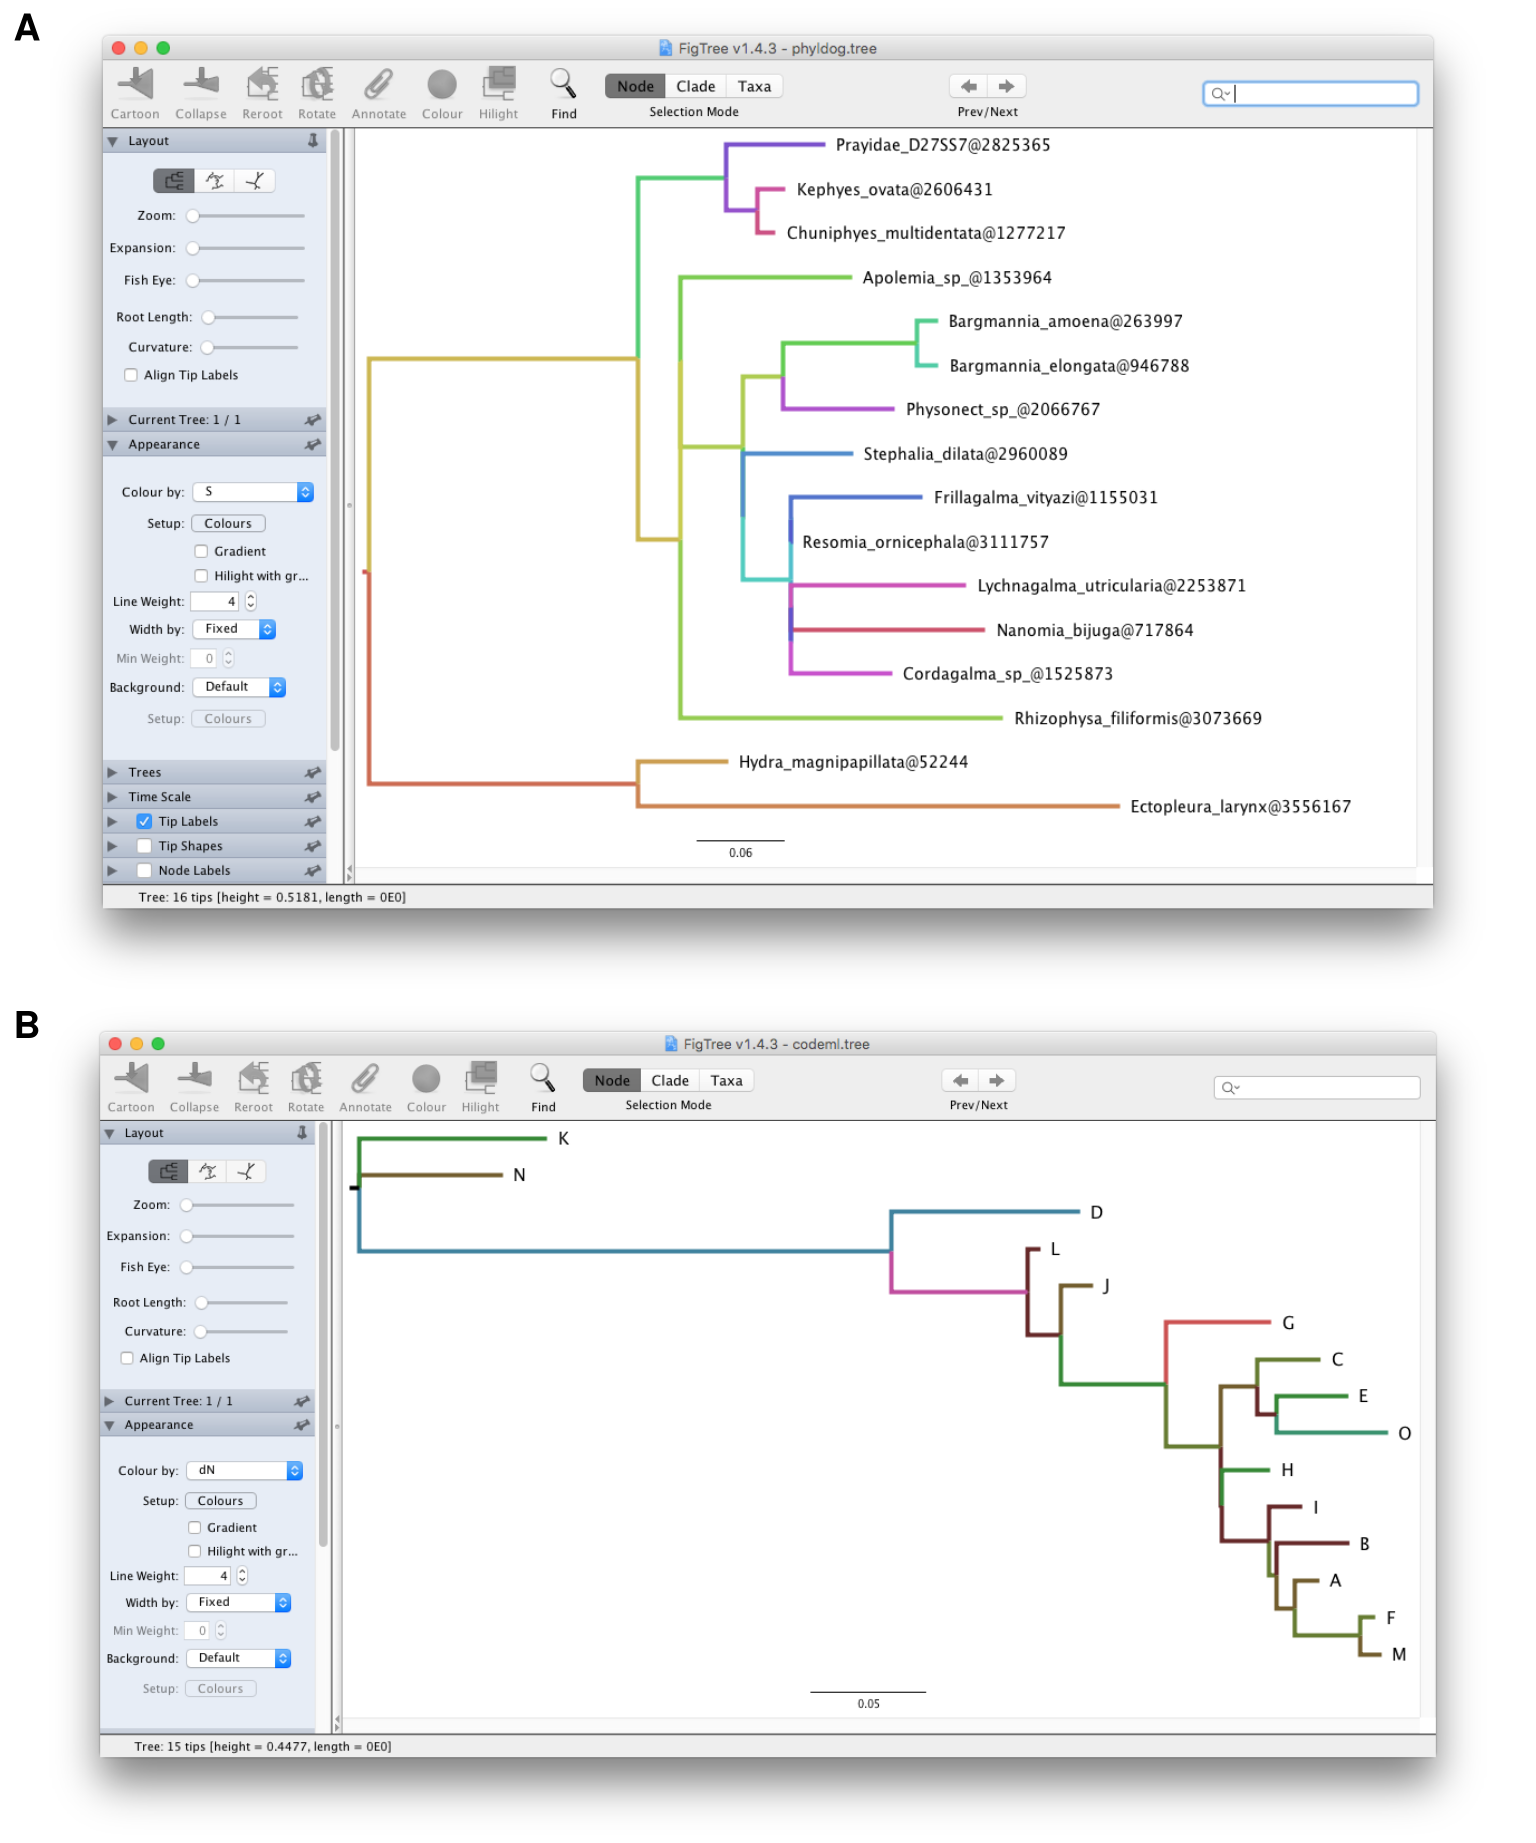 Visualizing BEAST file in FigTree. Directly visualizing NHX file (A) and CodeML output (B) in FigTree is not supported. treeio can convert these files to BEAST compatible NEXUS format which can be directly opened in FigTree and visualized annotated data.